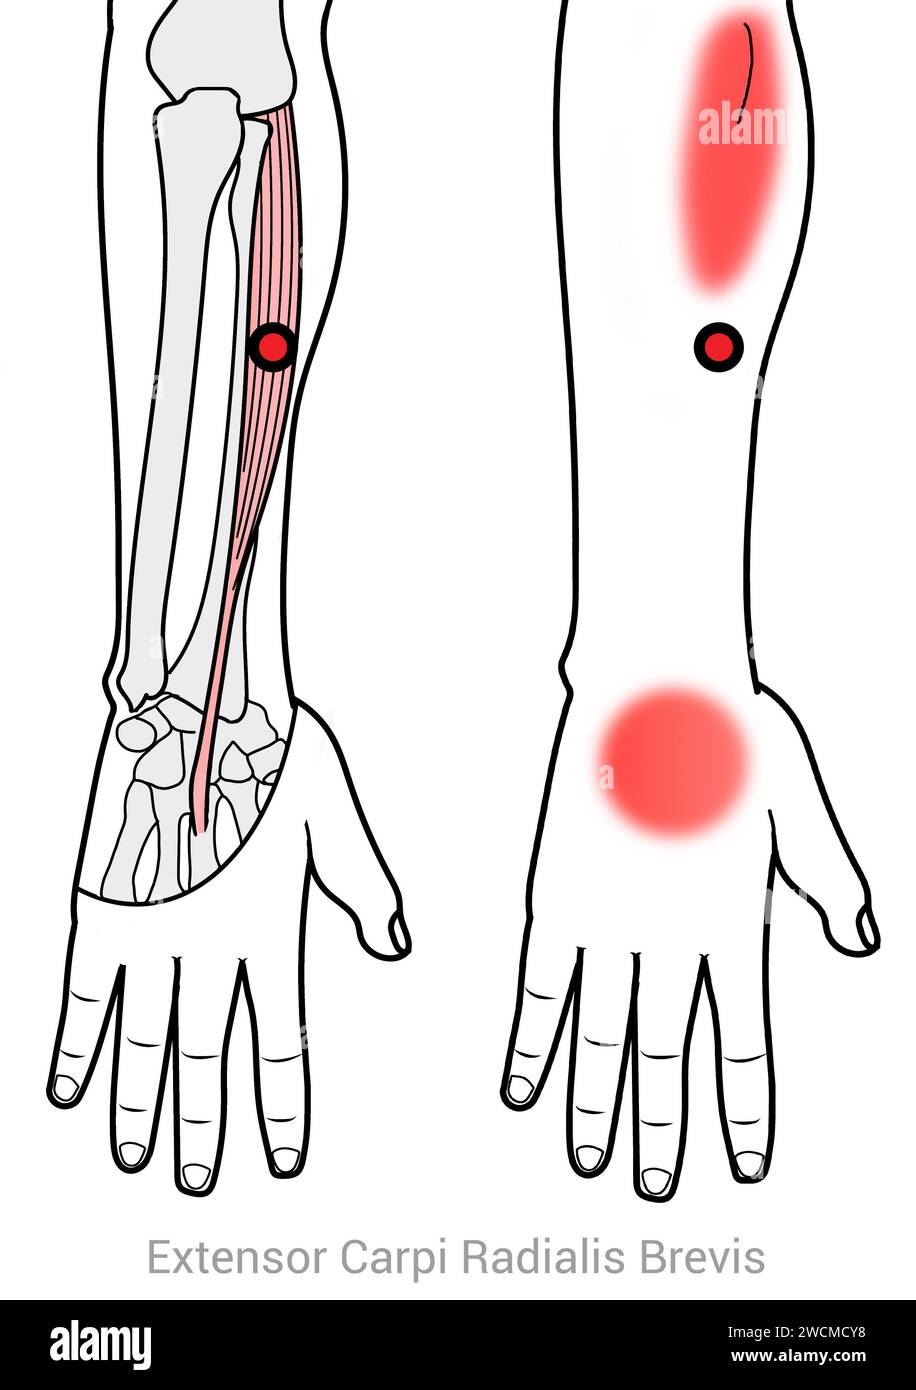 Extensor Carpi Radialis Brevis: Myofascial trigger points and associated pain locations Stock Photo